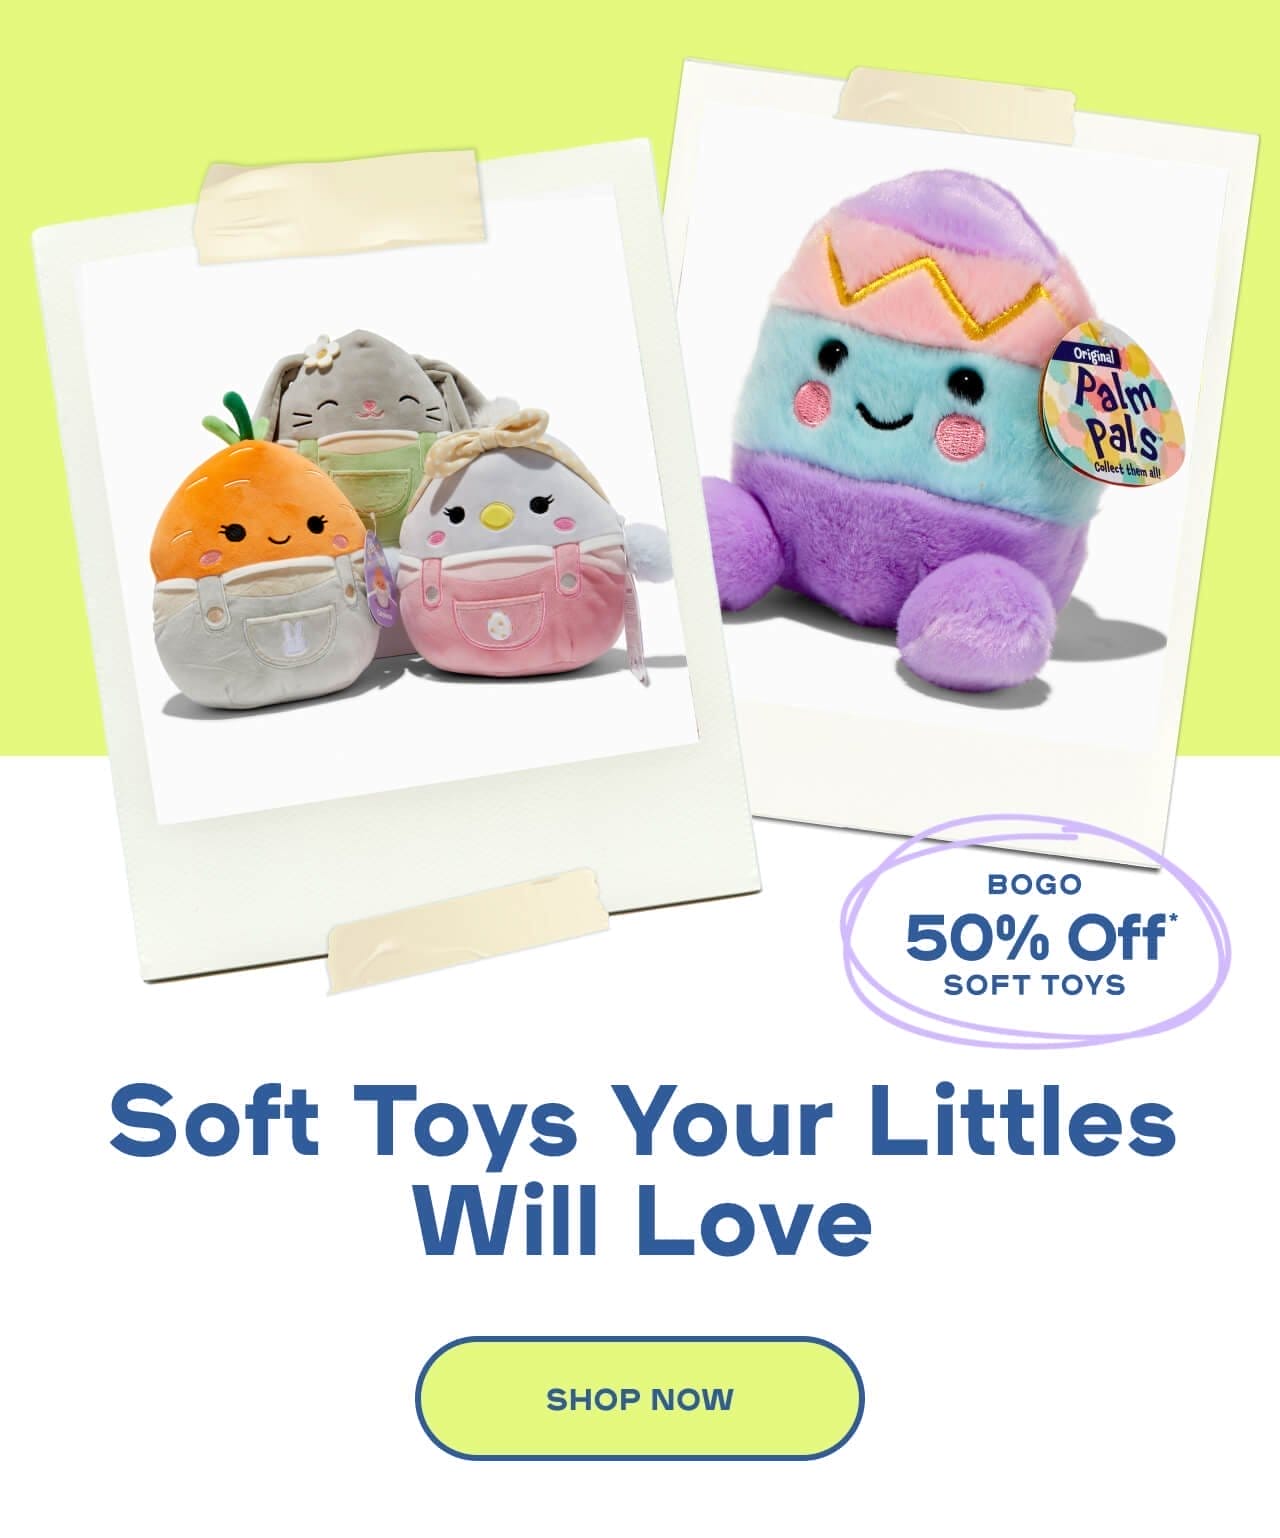 Soft Toys Your Littles Will Love- BOGO 50% Off* Soft Toys - SHOP NOW